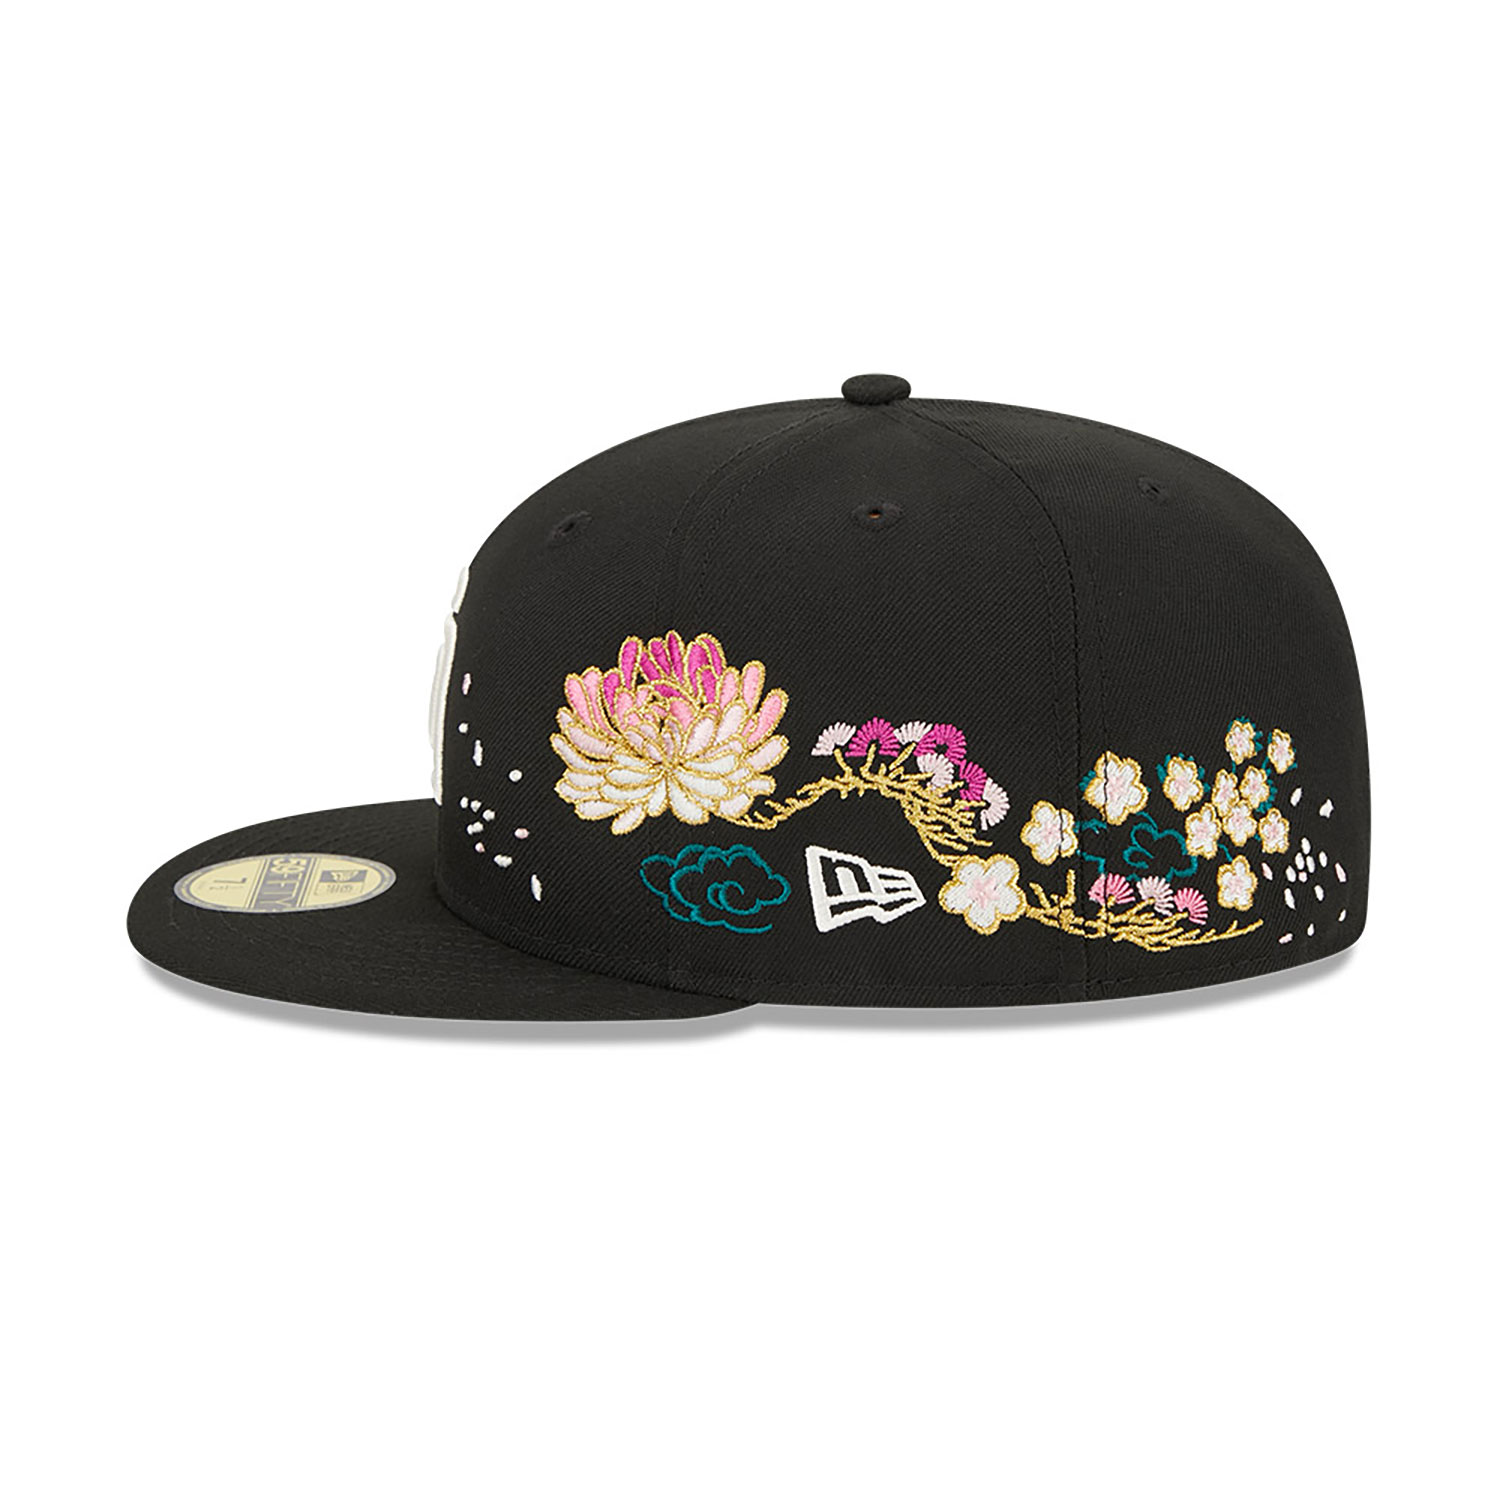 San Diego Padres Cherry Blossom Black 59FIFTY Fitted Cap